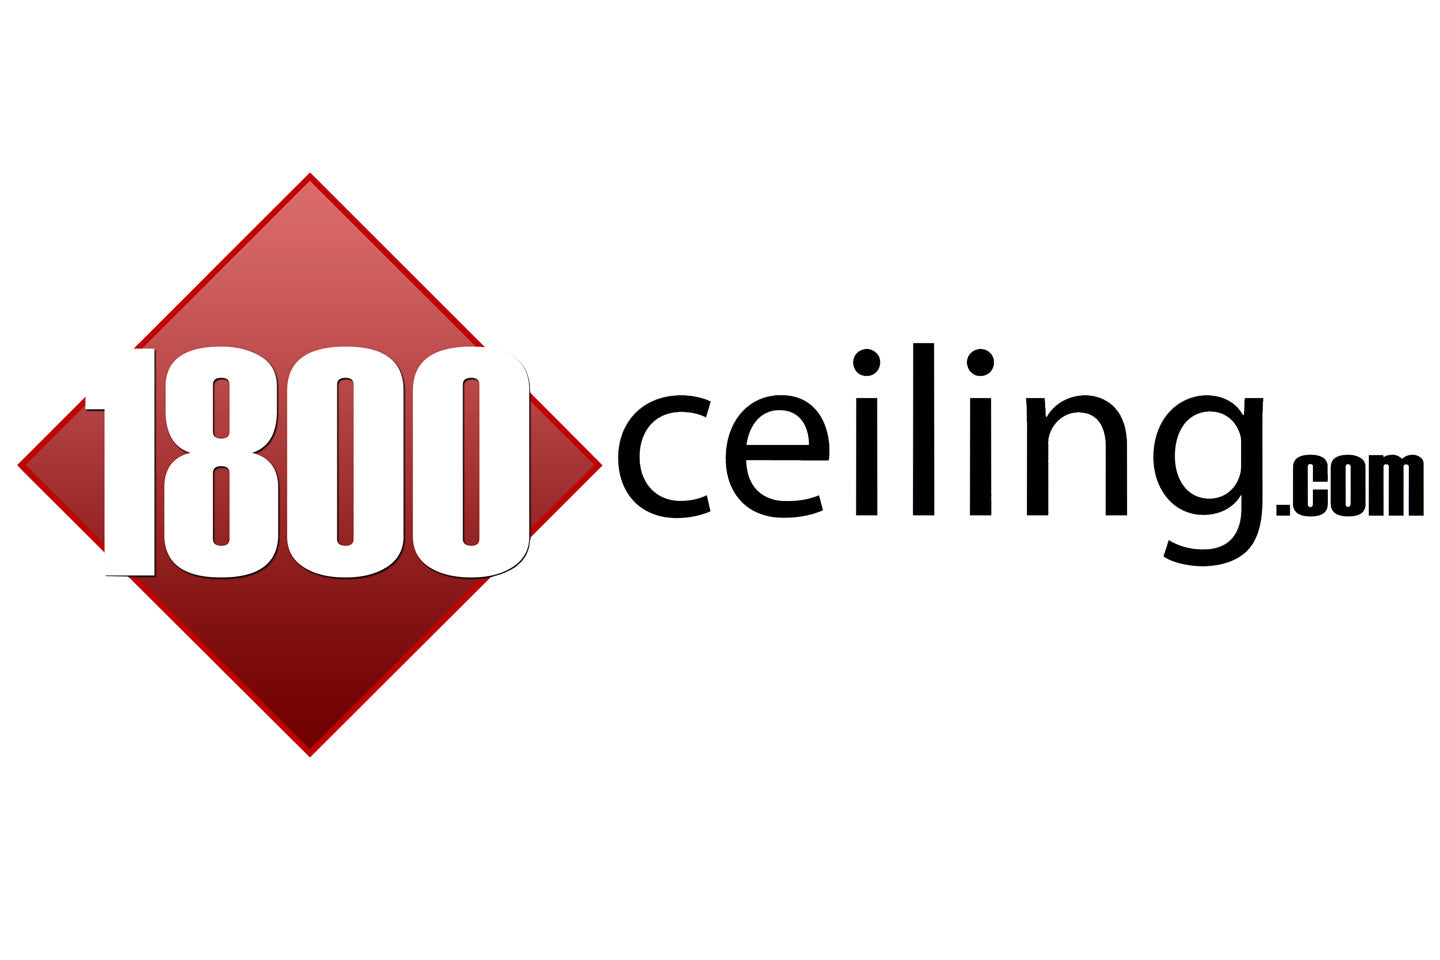 Get More Special Offer At 1800ceiling